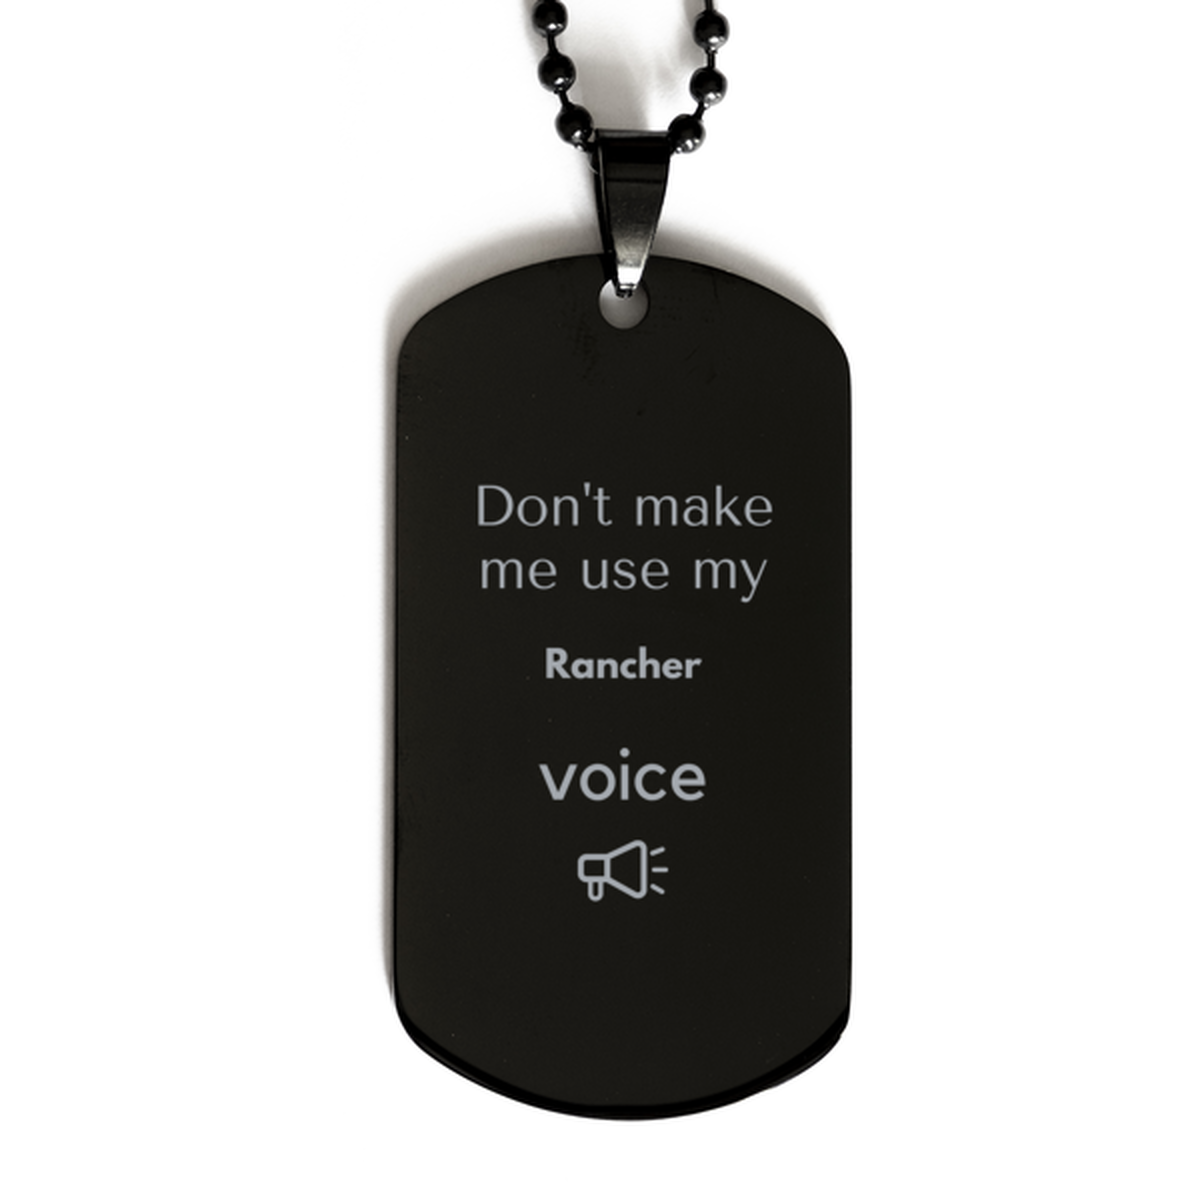 Don't make me use my Rancher voice, Sarcasm Rancher Gifts, Christmas Rancher Black Dog Tag Birthday Unique Gifts For Rancher Coworkers, Men, Women, Colleague, Friends